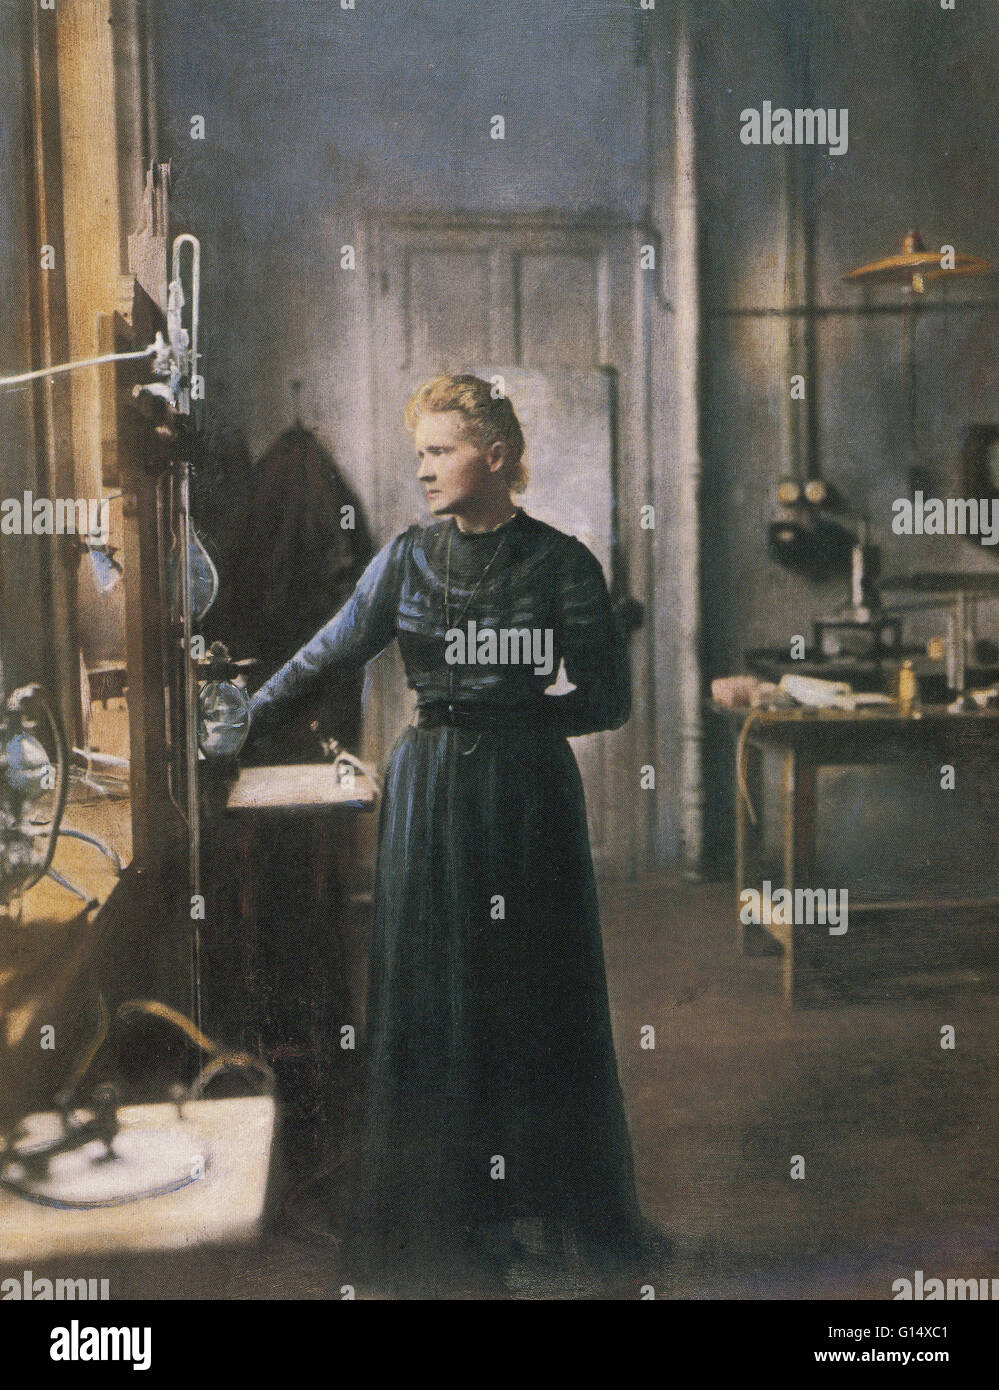 Portrait of Marie Curie in her laboratory. Curie (1867-1934) was a Polish-French chemist and physicist and a pioneer of radiology. She was the first person to receive two Nobel Prizes (chemistry and physics) and also the first to be awarded these prizes i Stock Photo